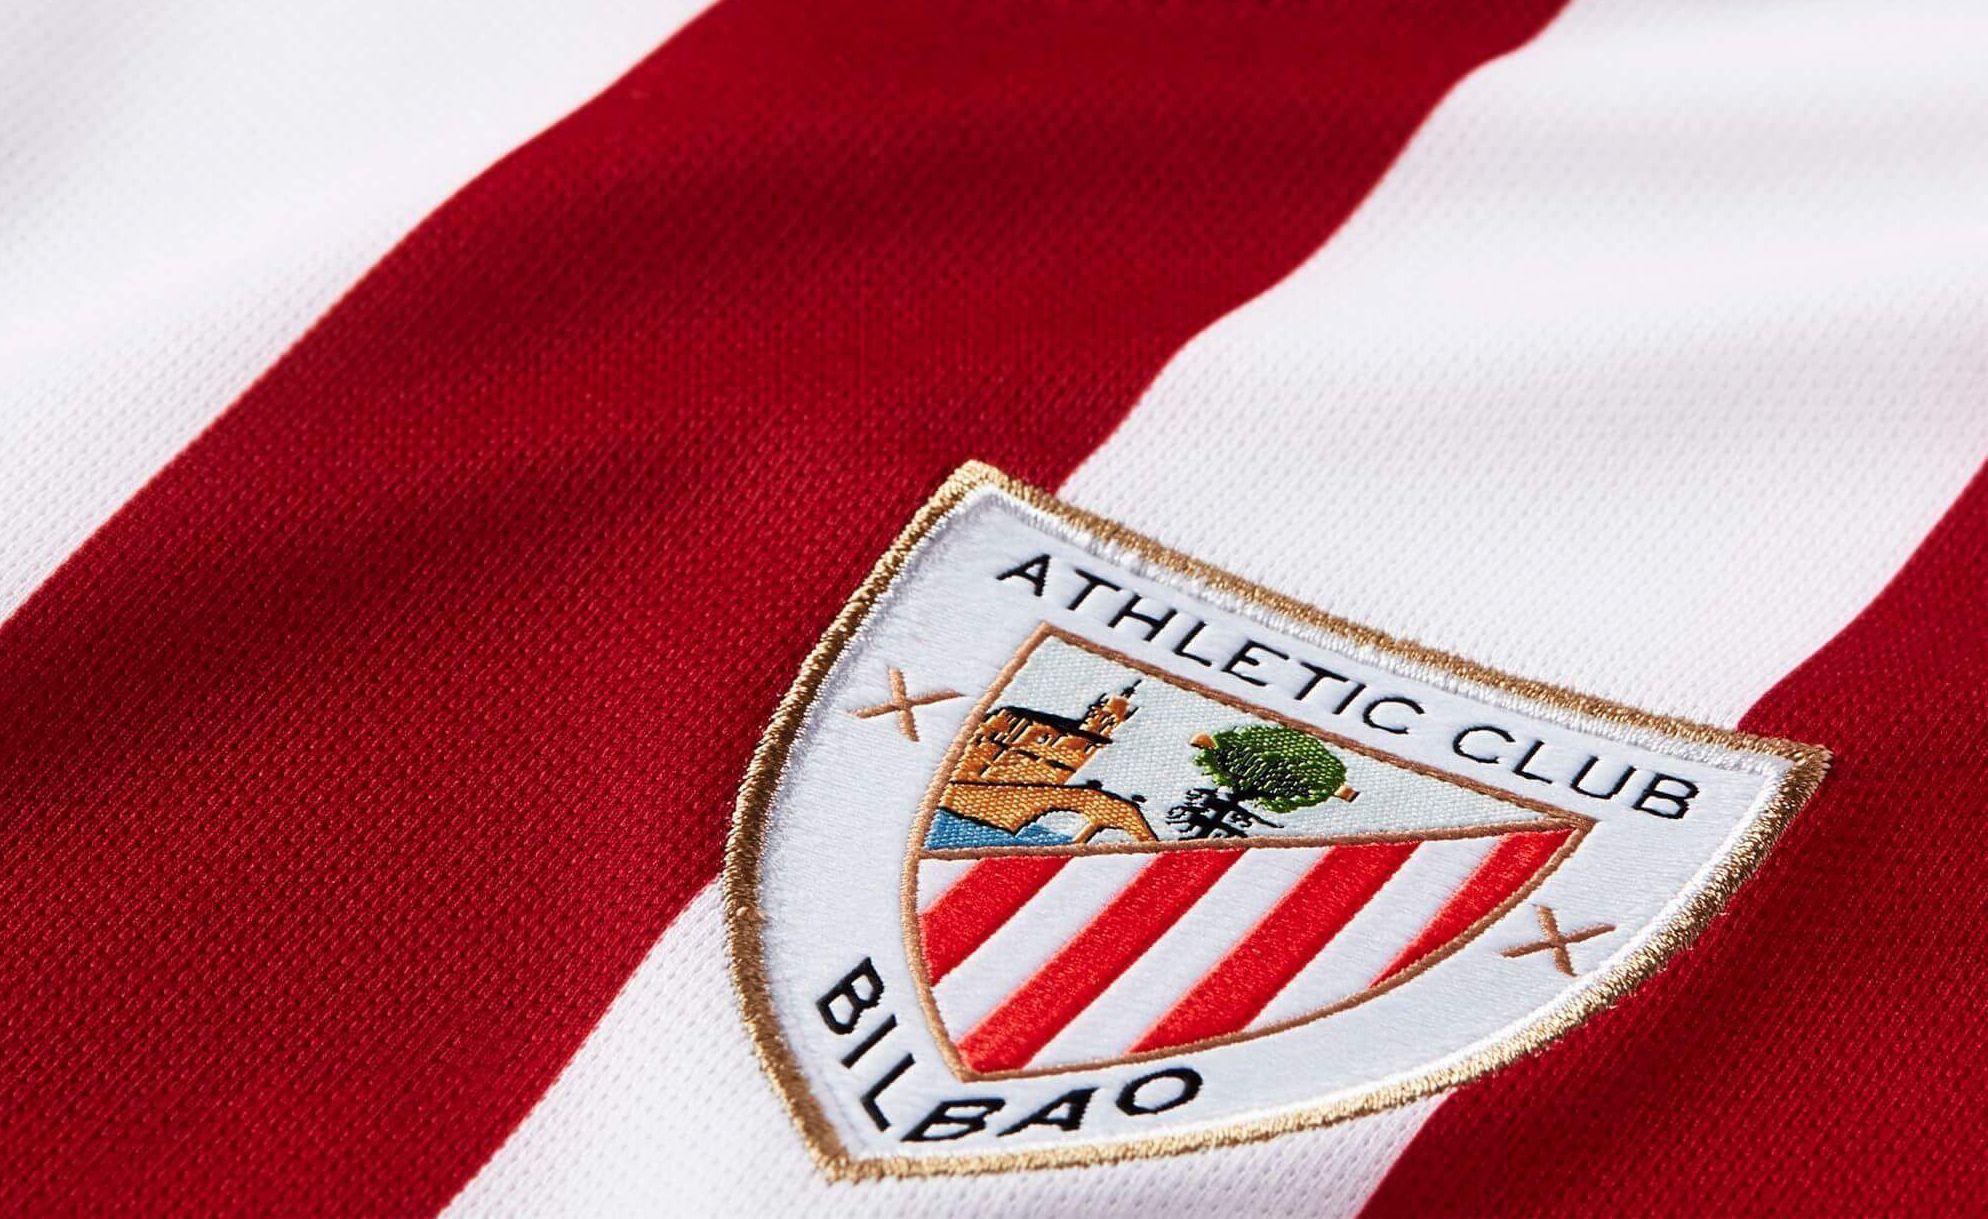 Athletic Bilbao Free HD Wallpaper Image Background